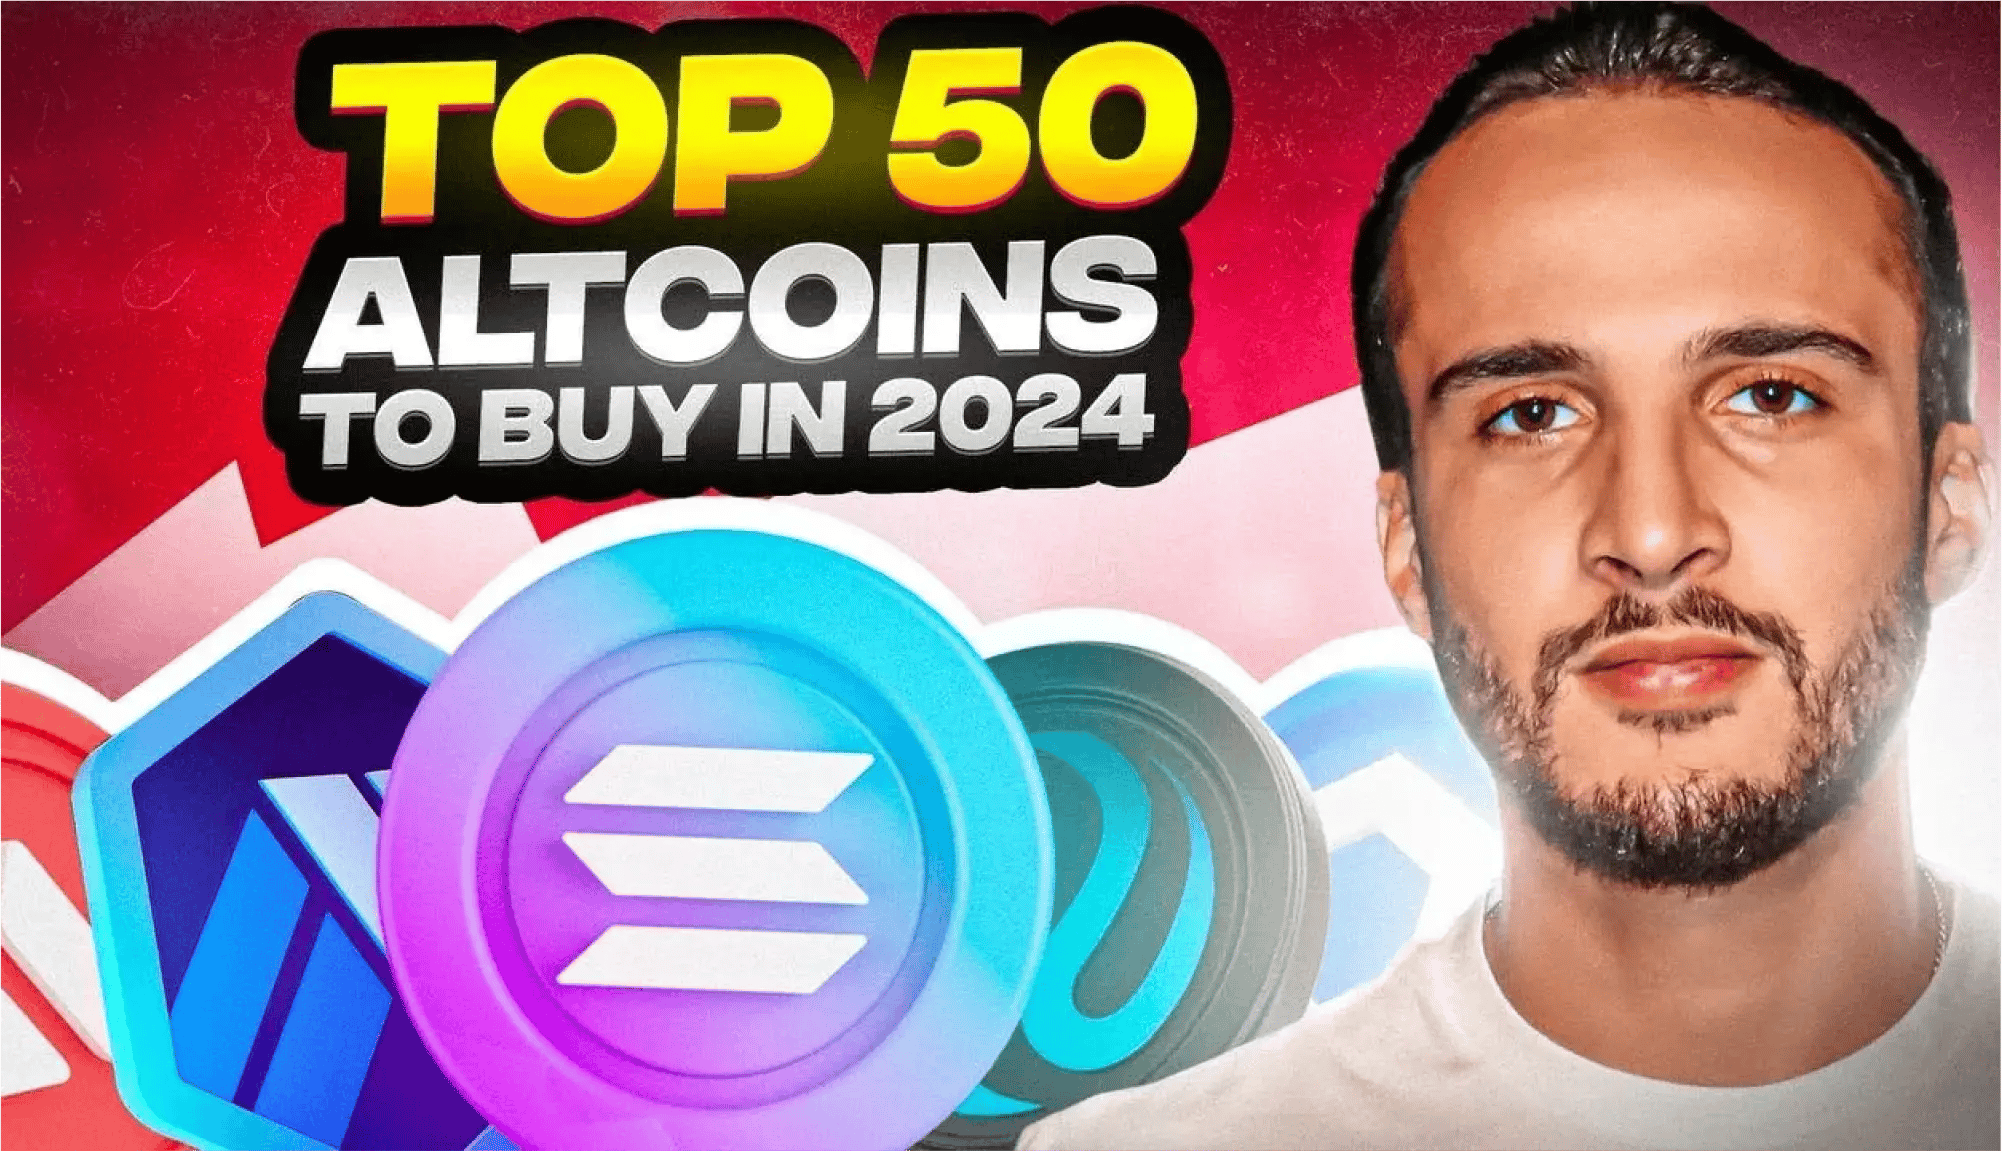 Top 50 Altcoins to Buy in 2024